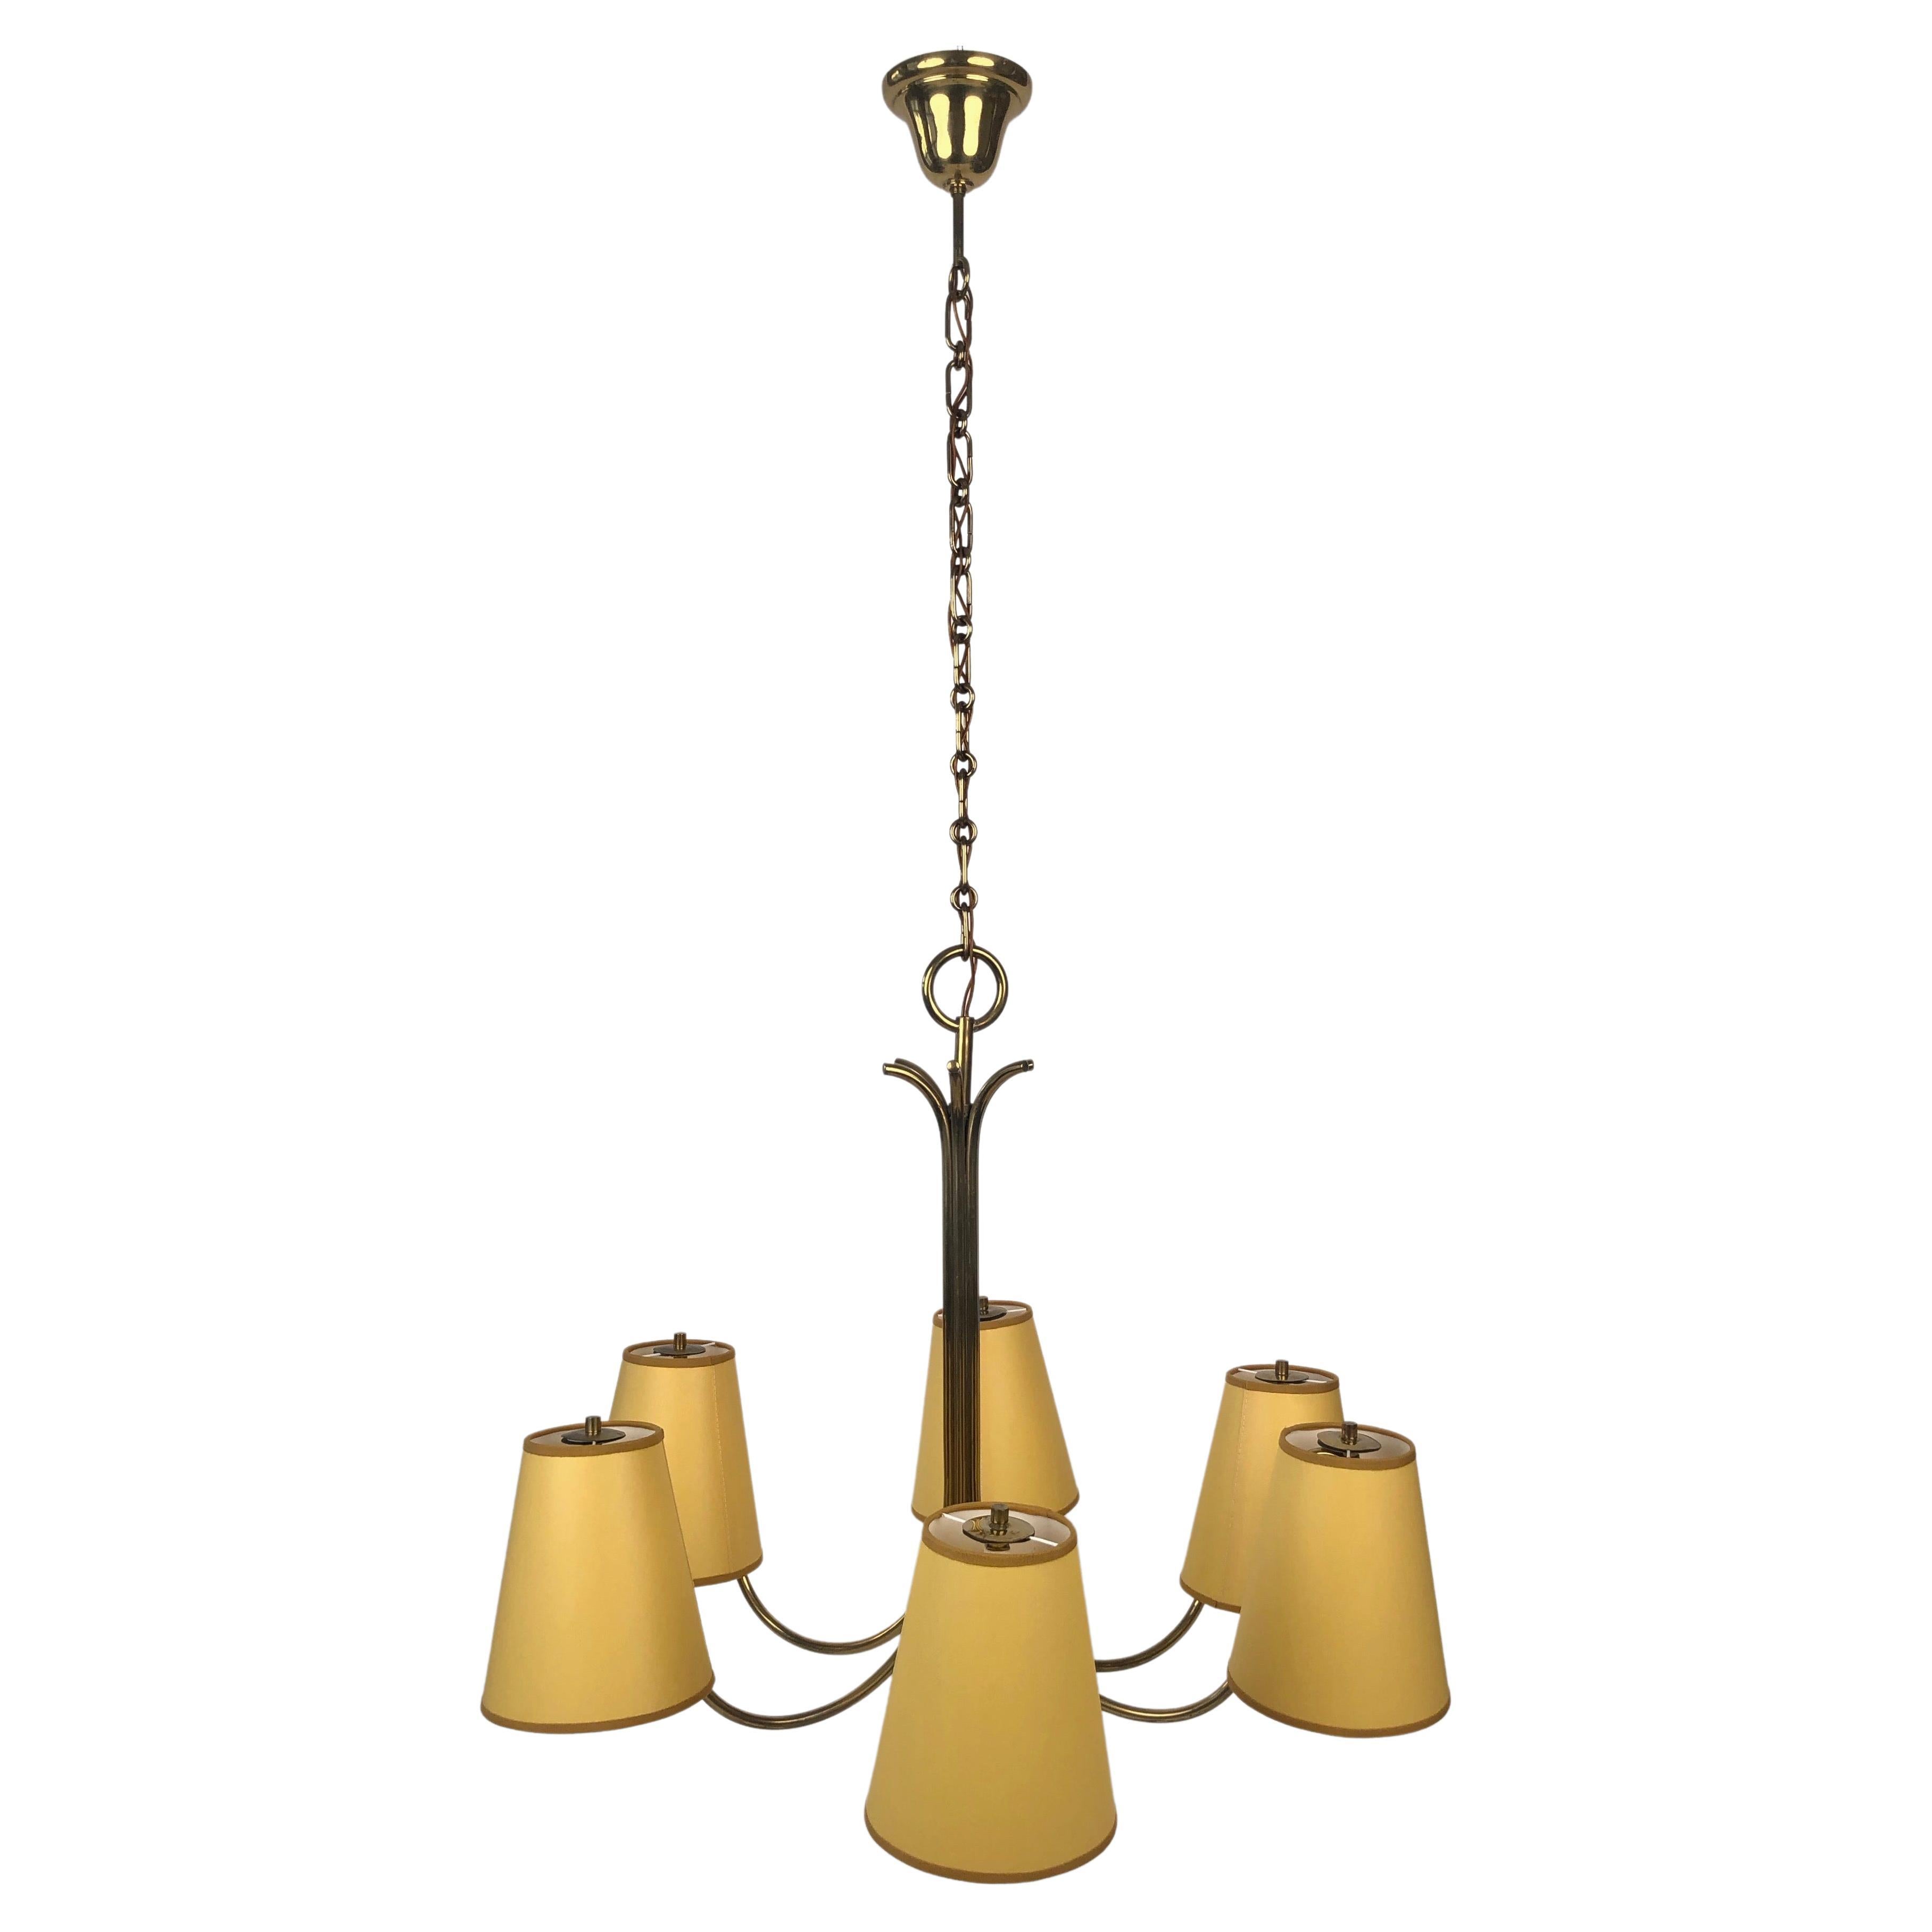 Large Chandelier with Six Shades in Brass from Josef Frank , Austria